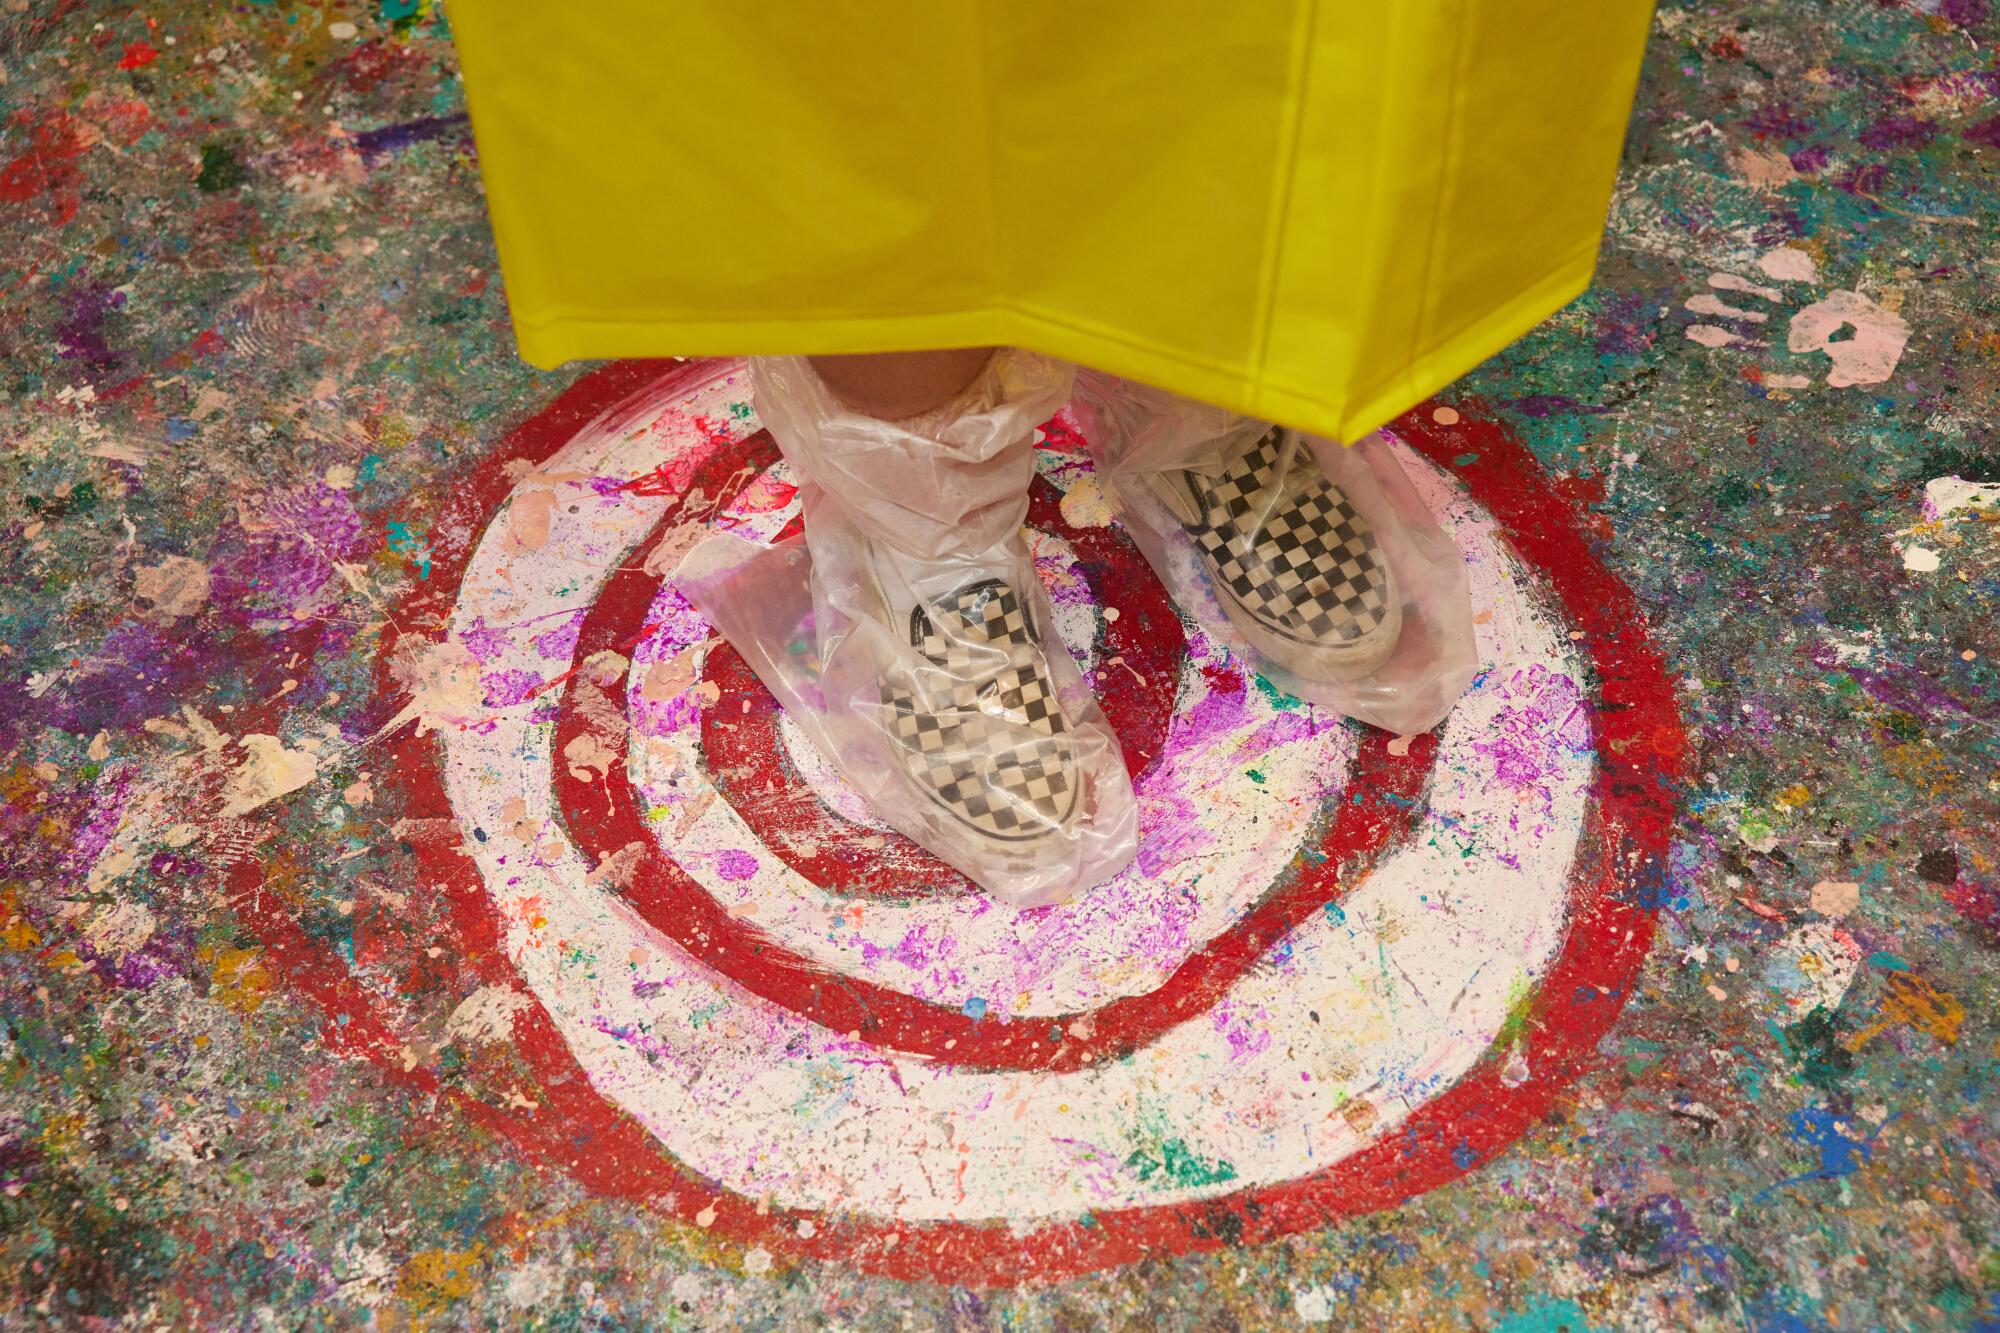 A pair of feet, standing atop a painted target on the floor.